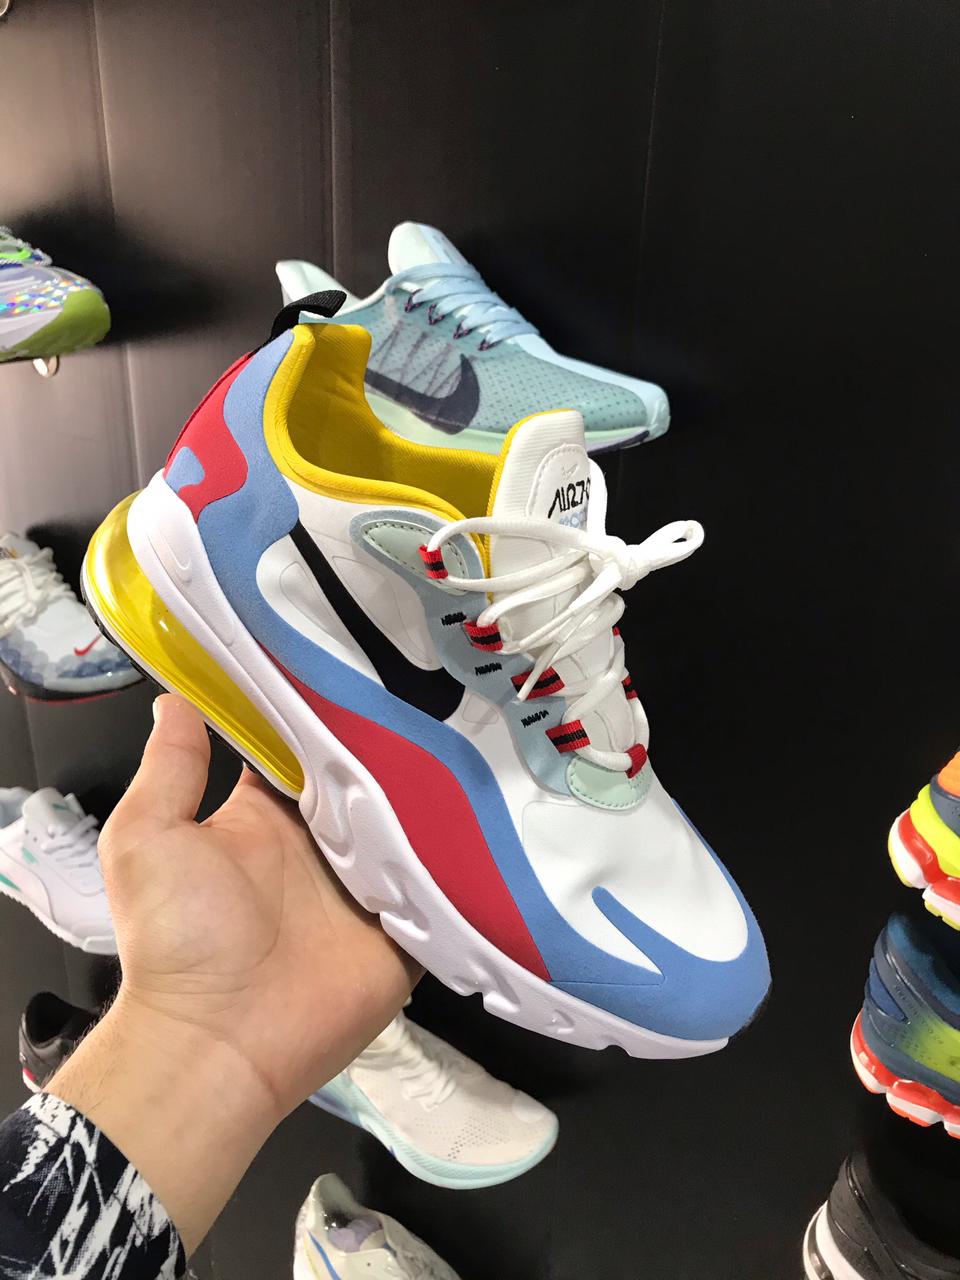 Branded React Multi color Sneakers